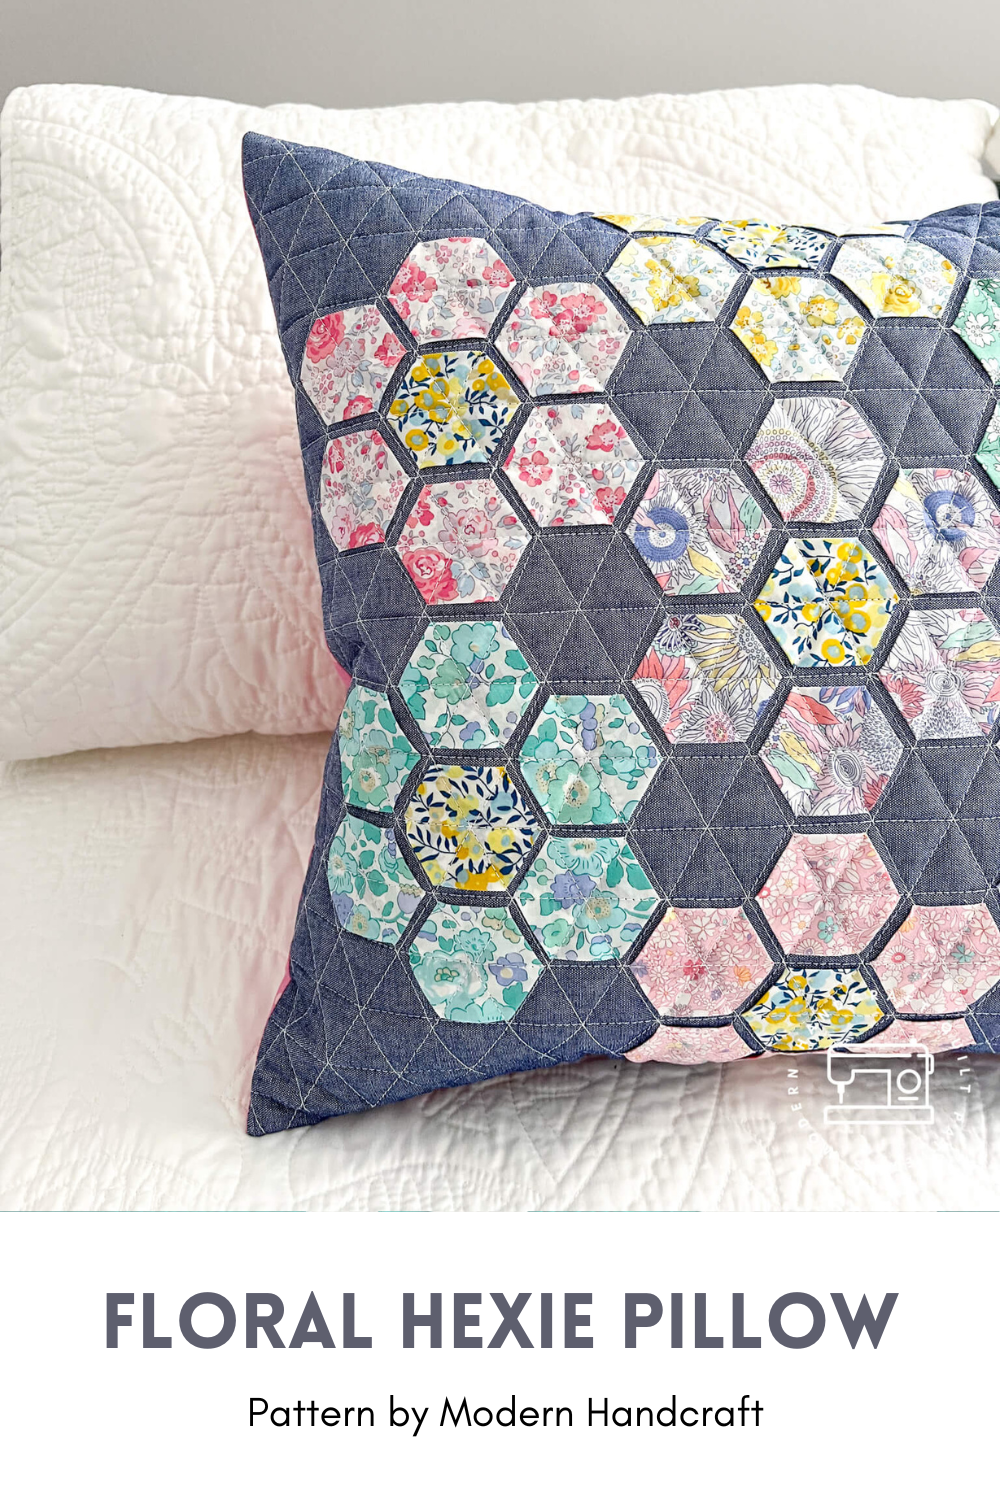 Floral Liberty Hexie Pillow Pattern by Modern Handcraft